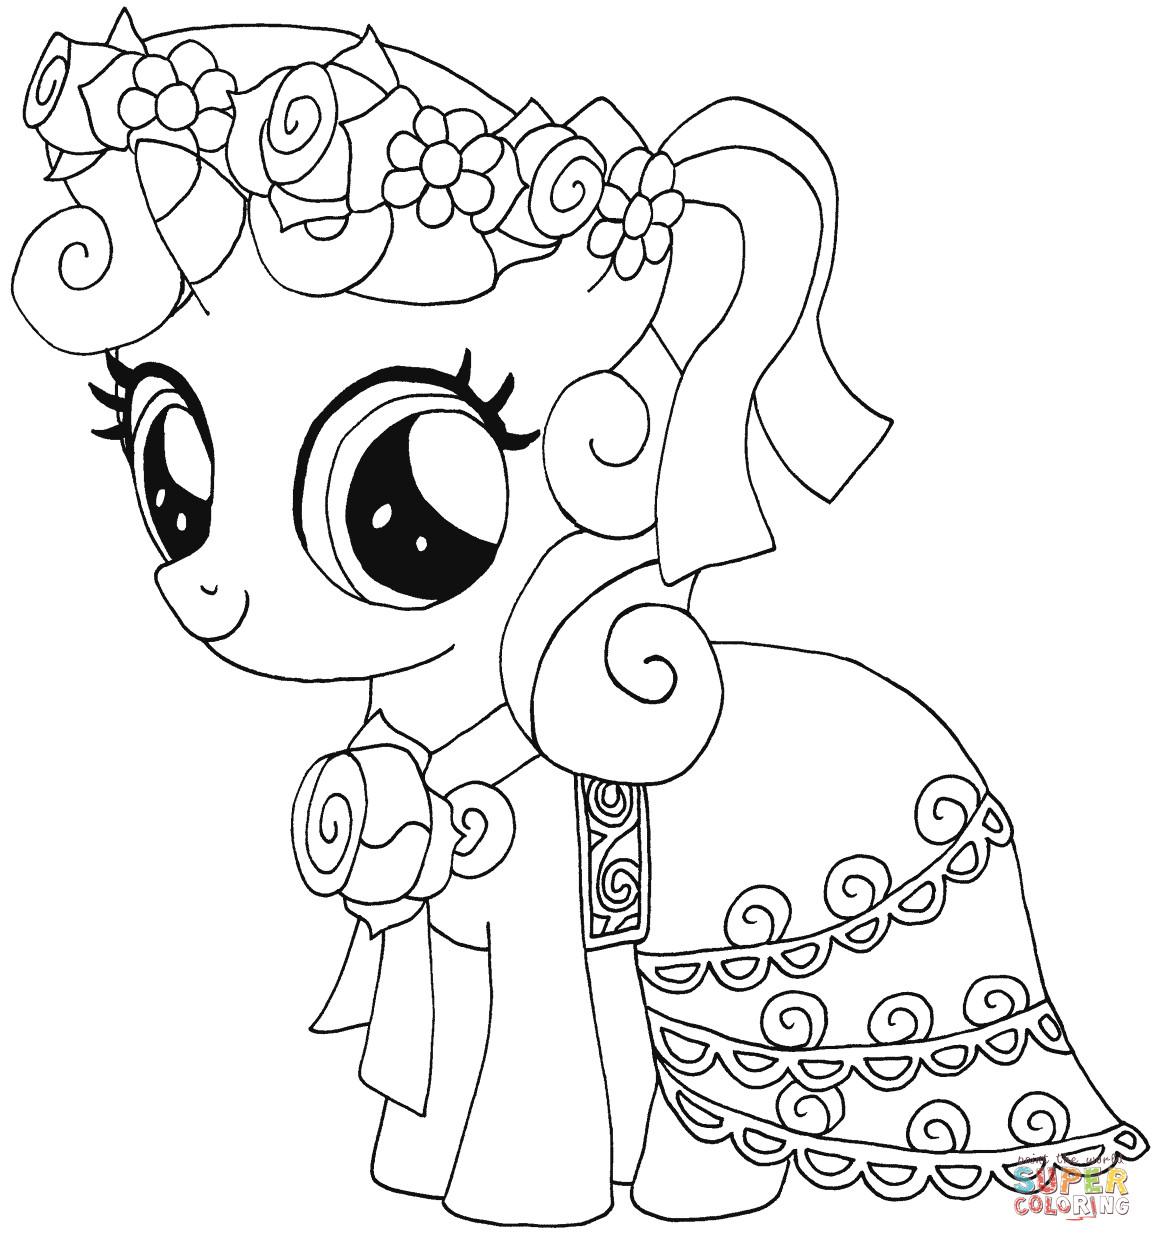 Baby Pony Coloring Pages
 My Little Pony Sweetie Belle coloring page